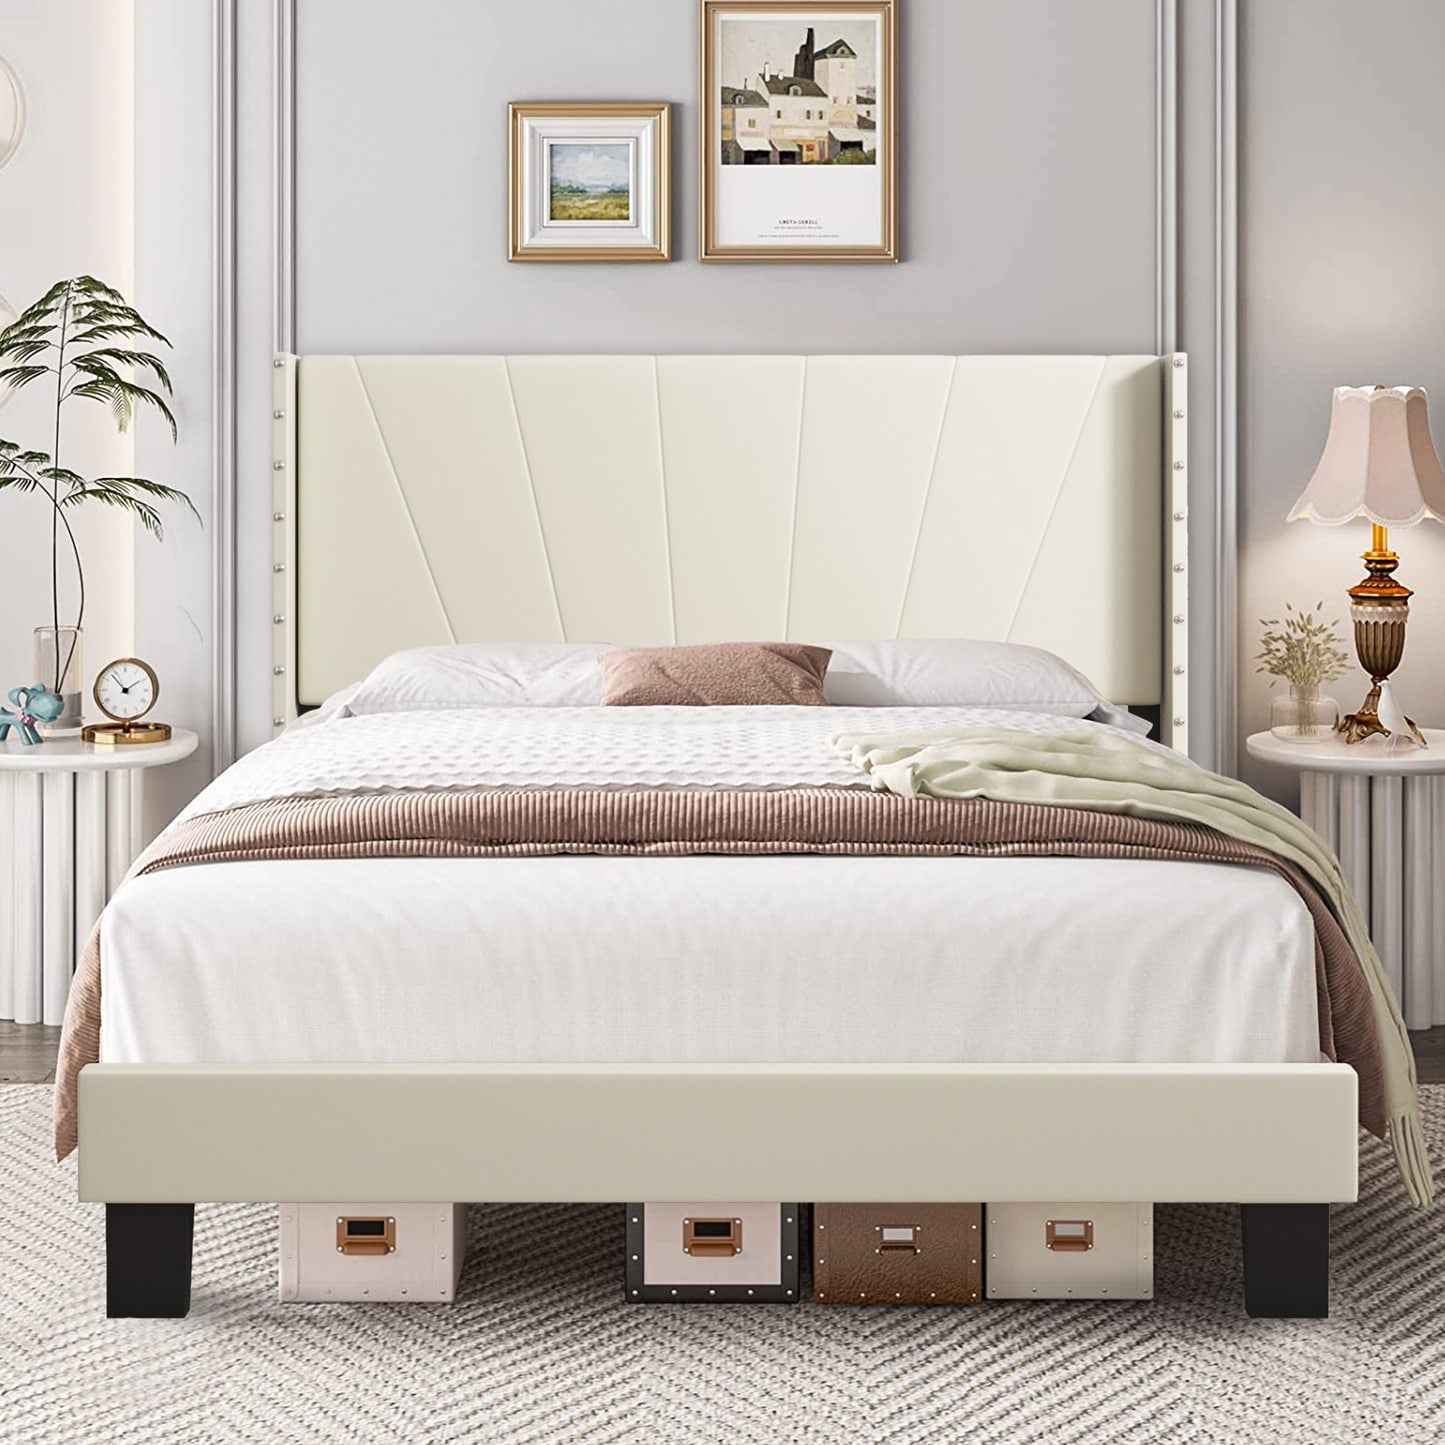 SYNGAR Beige Fabric Upholstered Platform Bed Frame Twin Size with Rivet Wingback Headboard, Metal Frame Mattress Foundation with Strong Wooden Slat Support, No Box Spring Needed, Easy Assembly